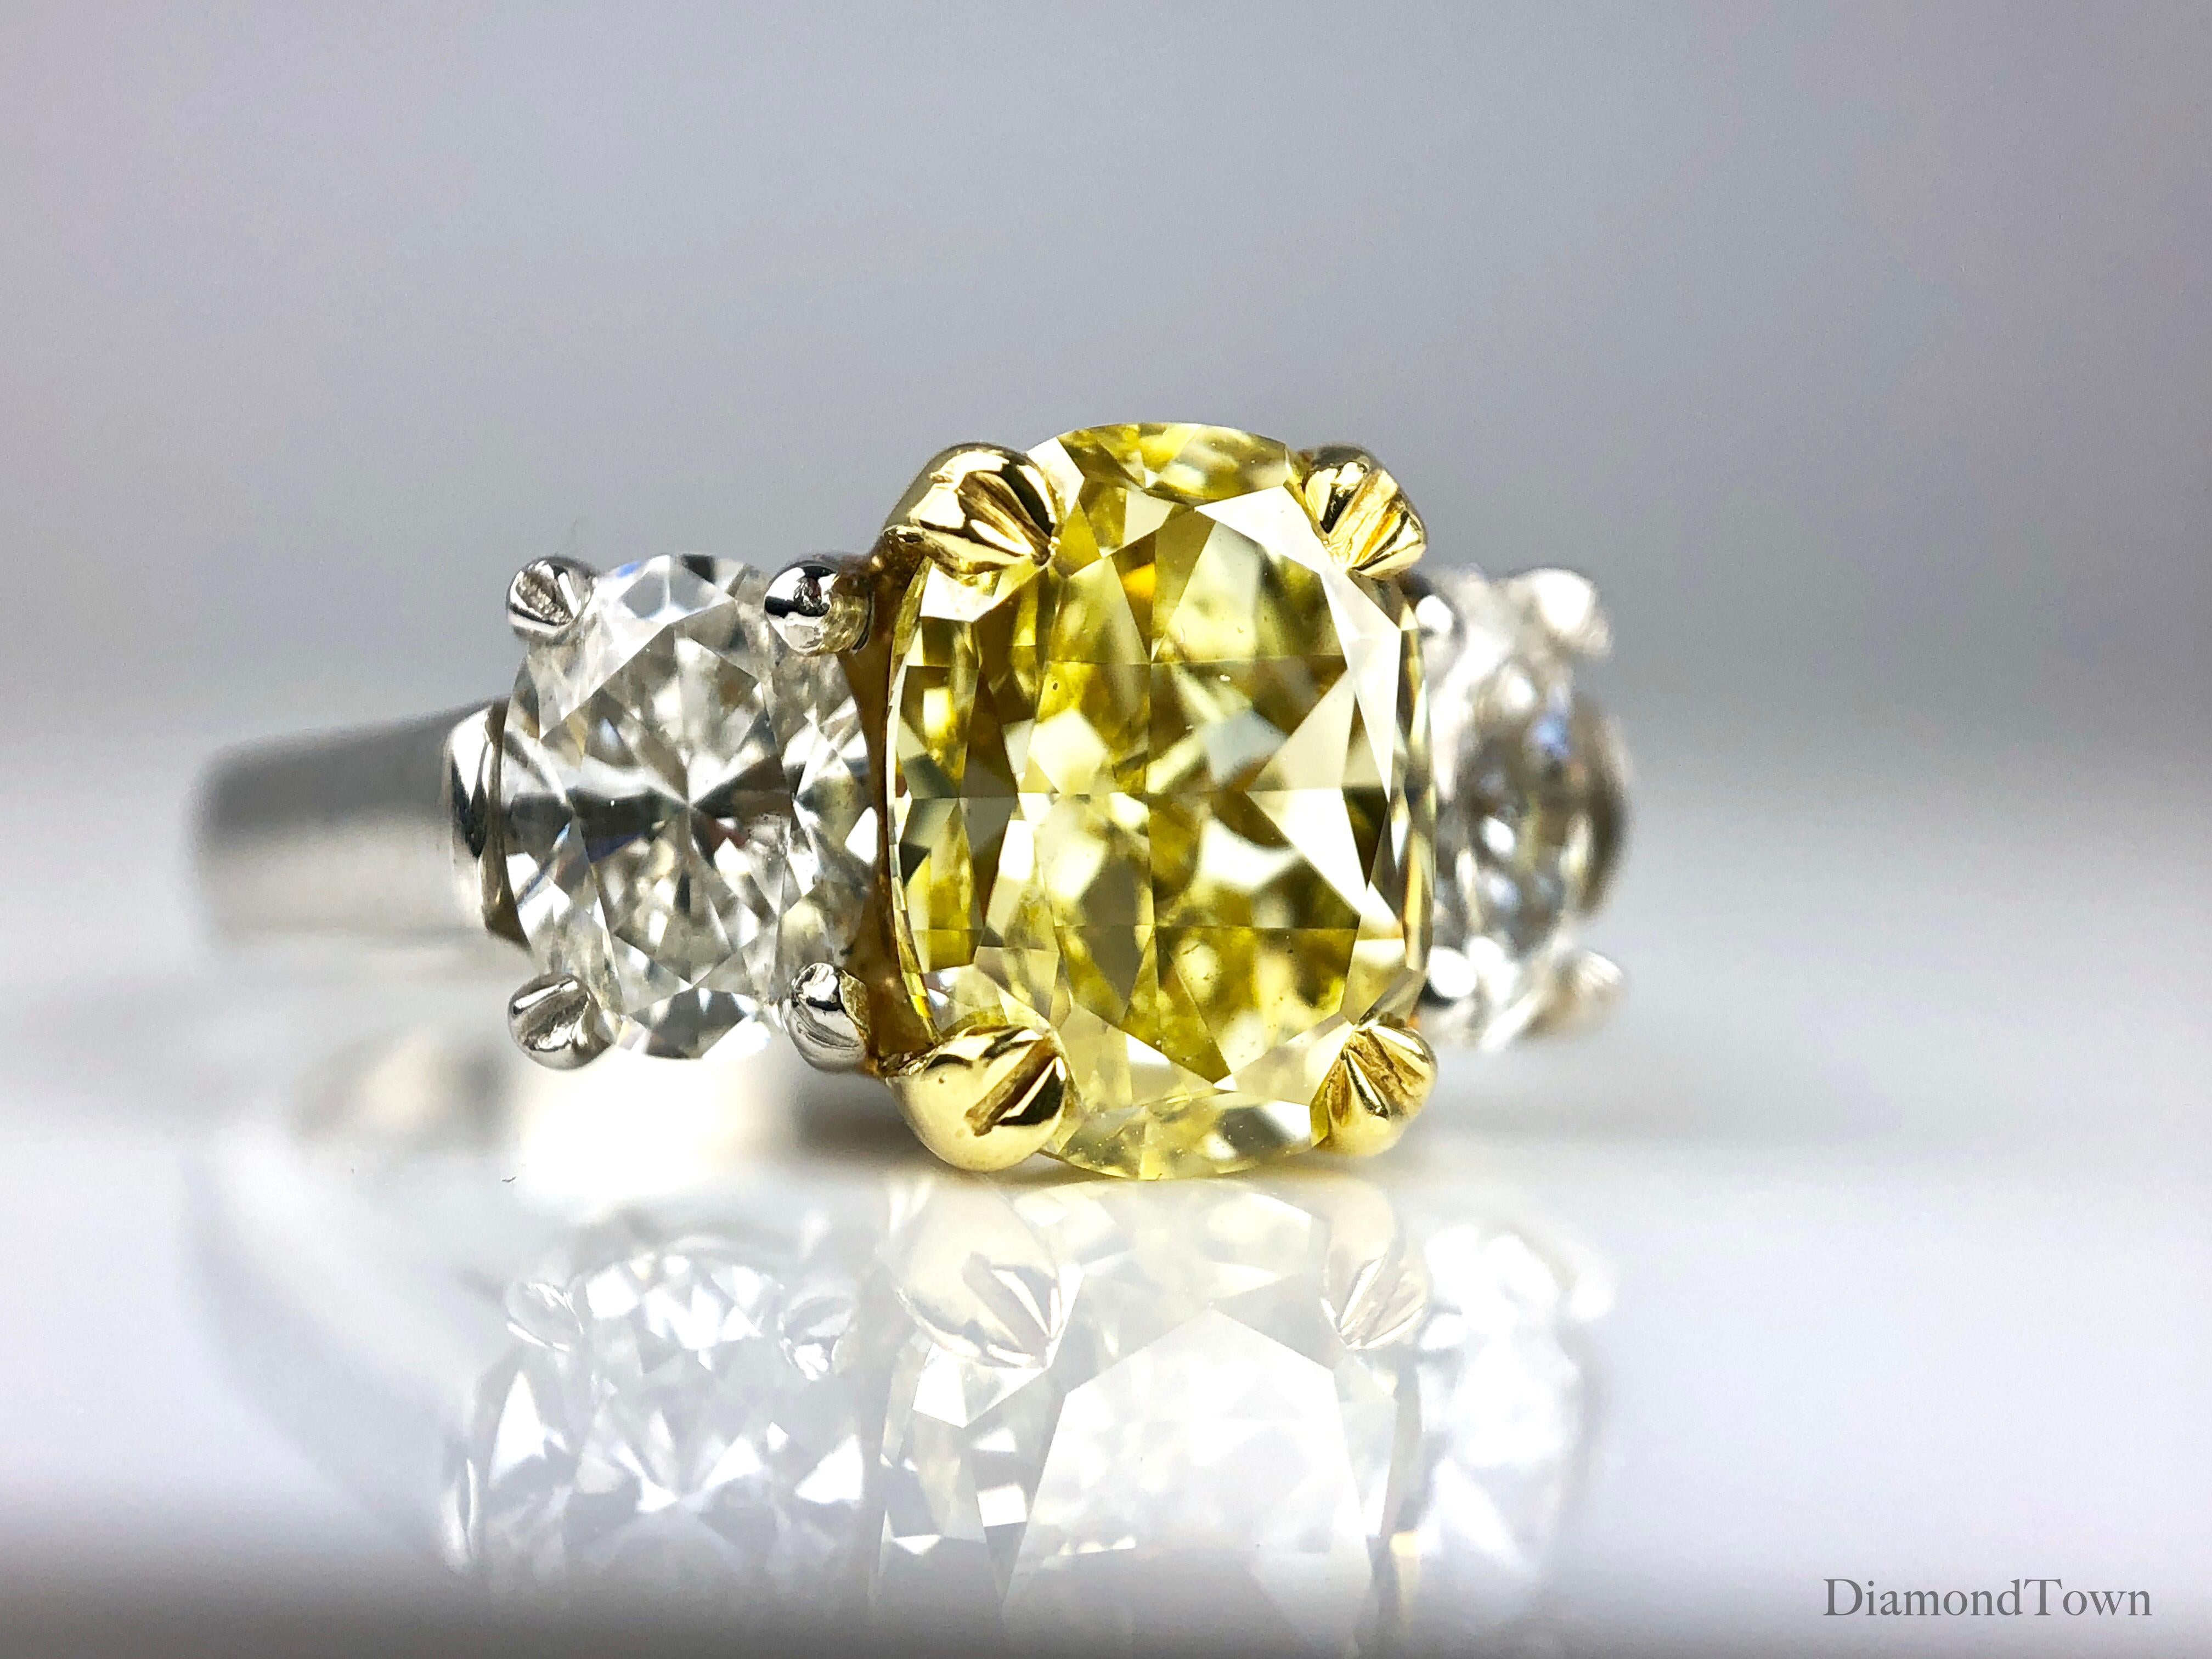 Oval Cut GIA Certified 2.01 Carat Natural Fancy Intense Yellow Diamond Ring ref124 For Sale